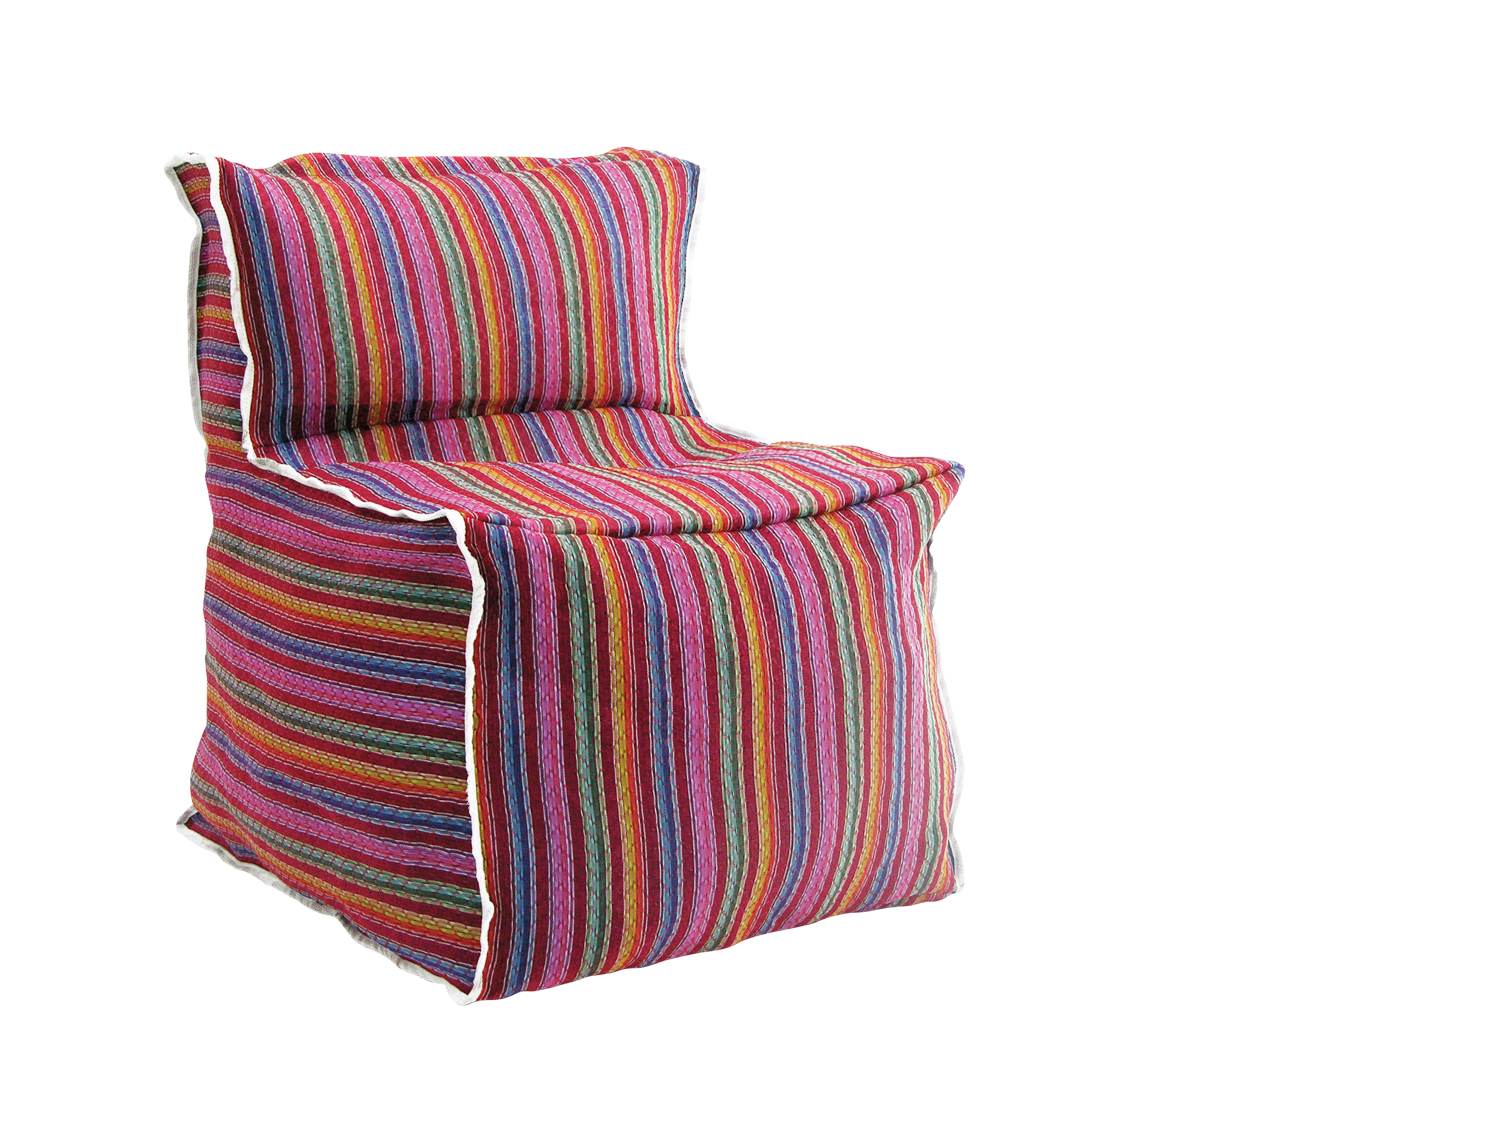 a multi-colored fabric outdoor seat